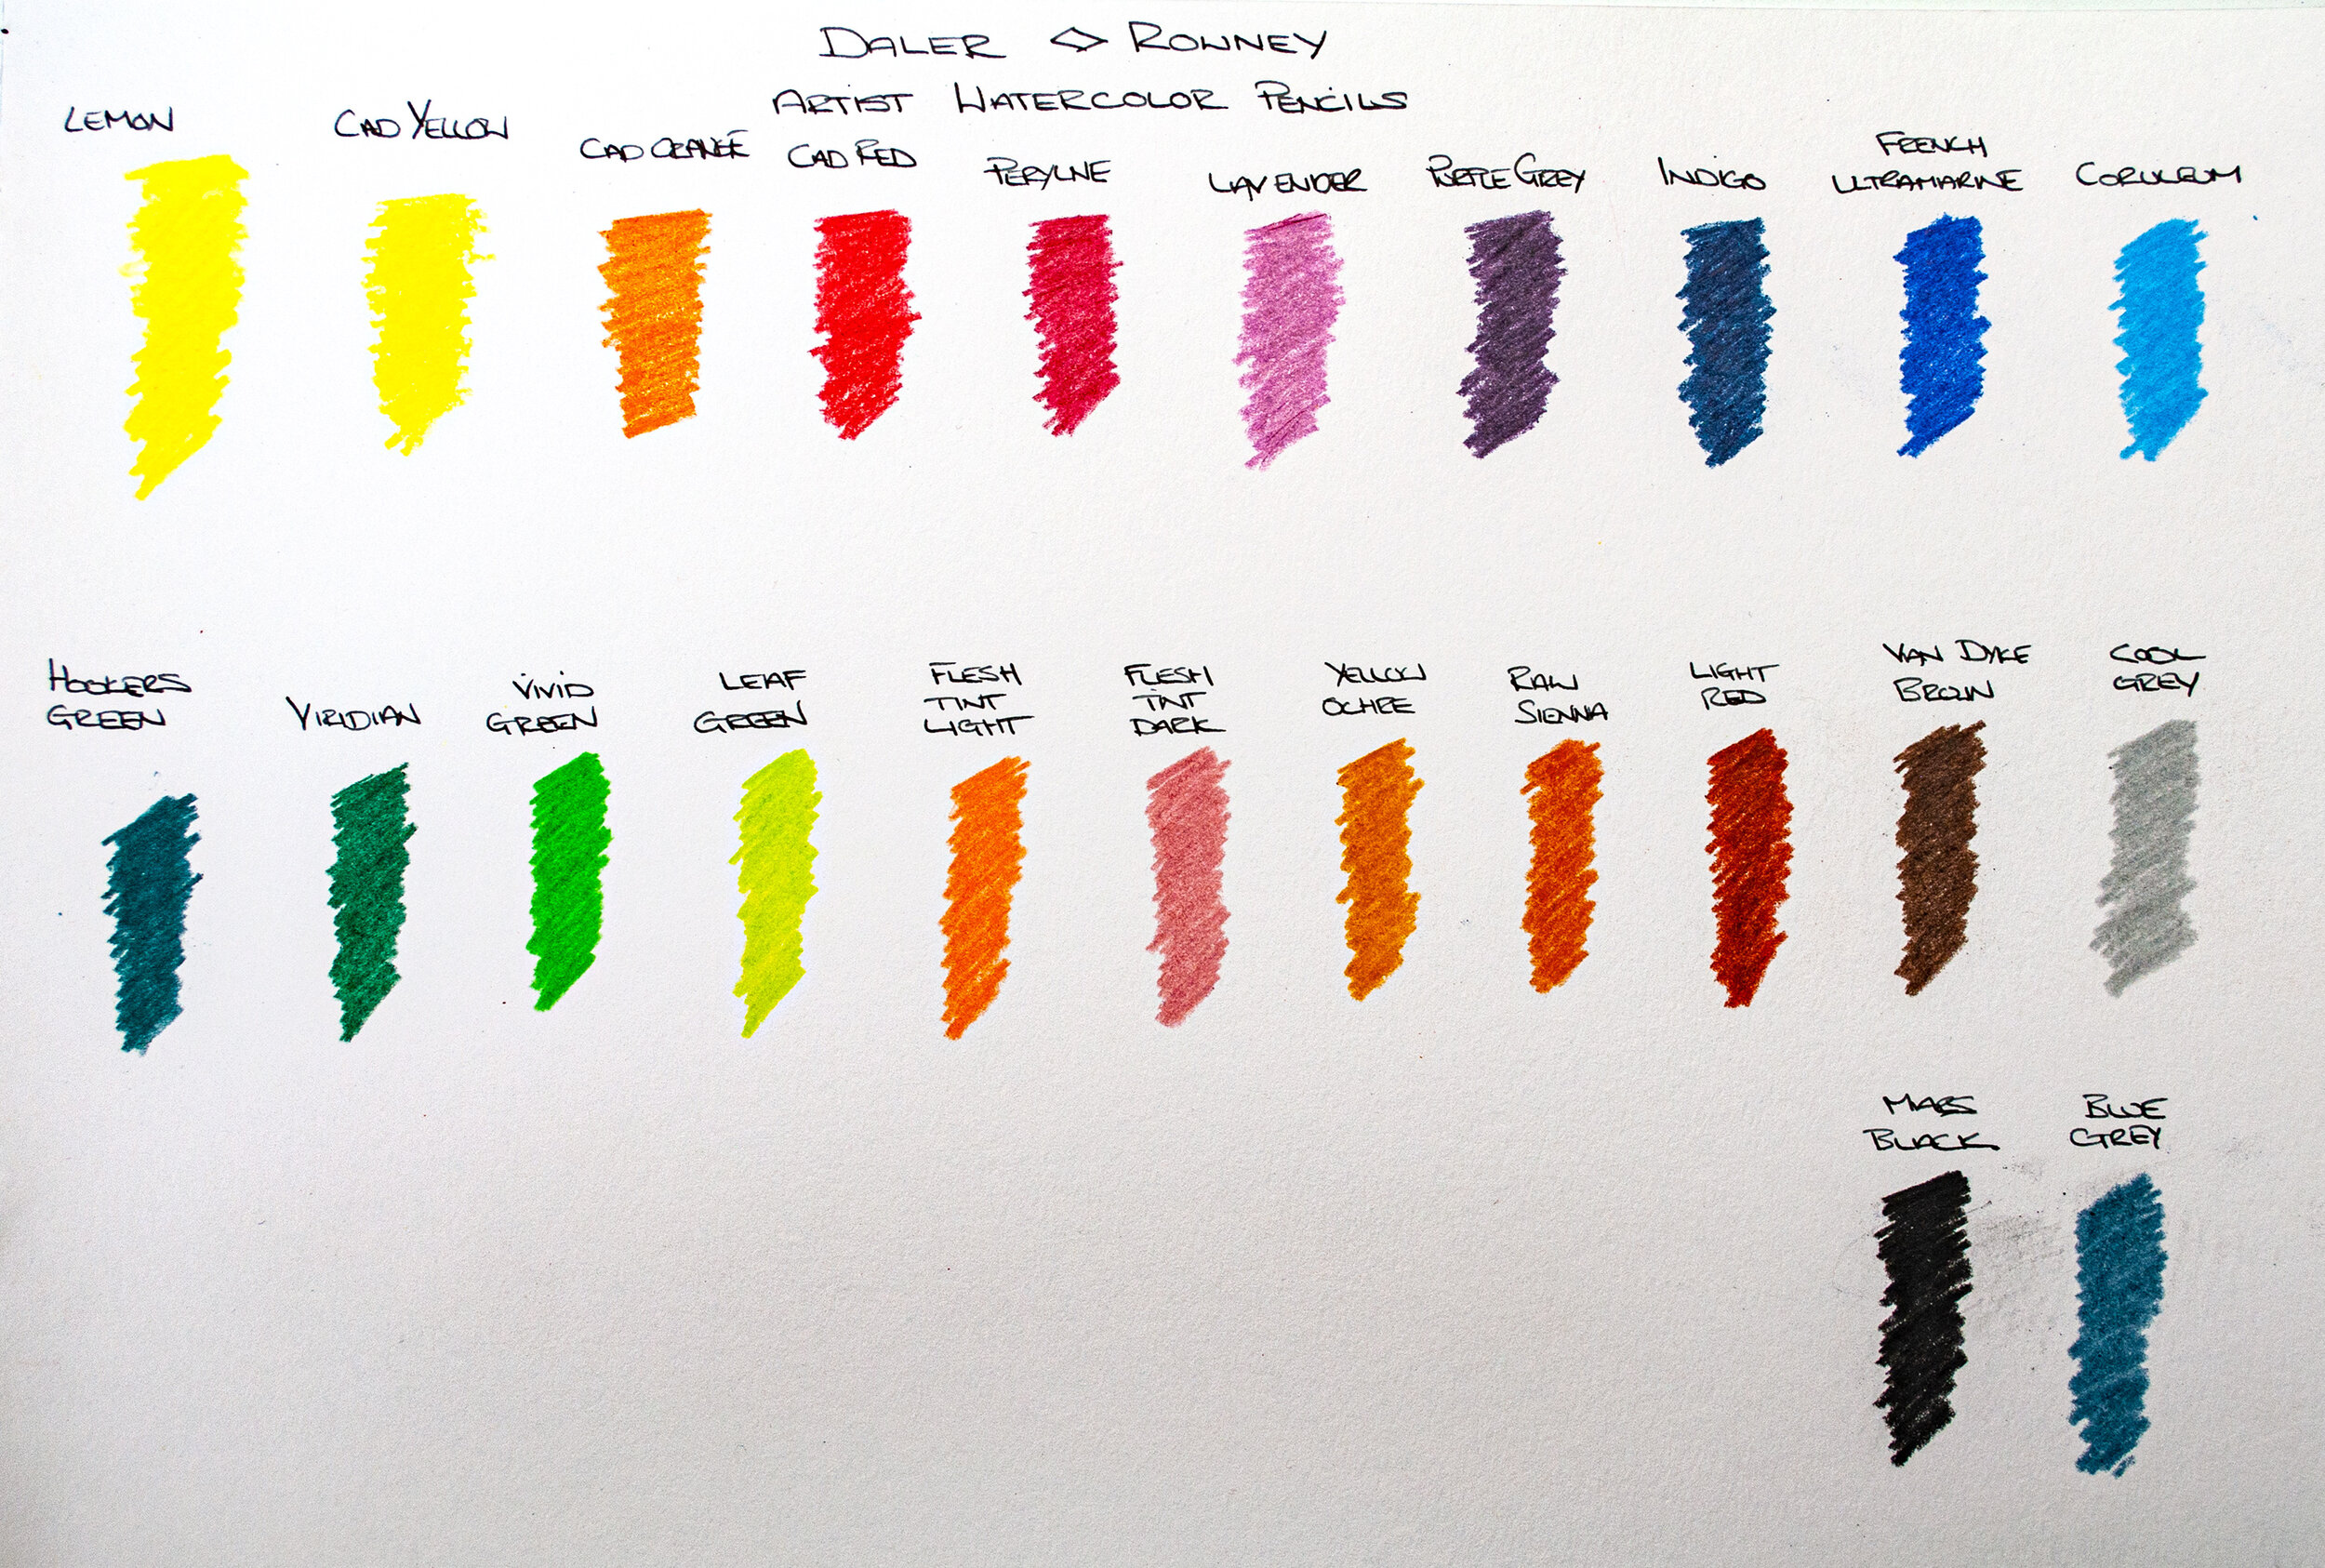 Watercolours: Daler-Rowney Artists Watercolours (review)